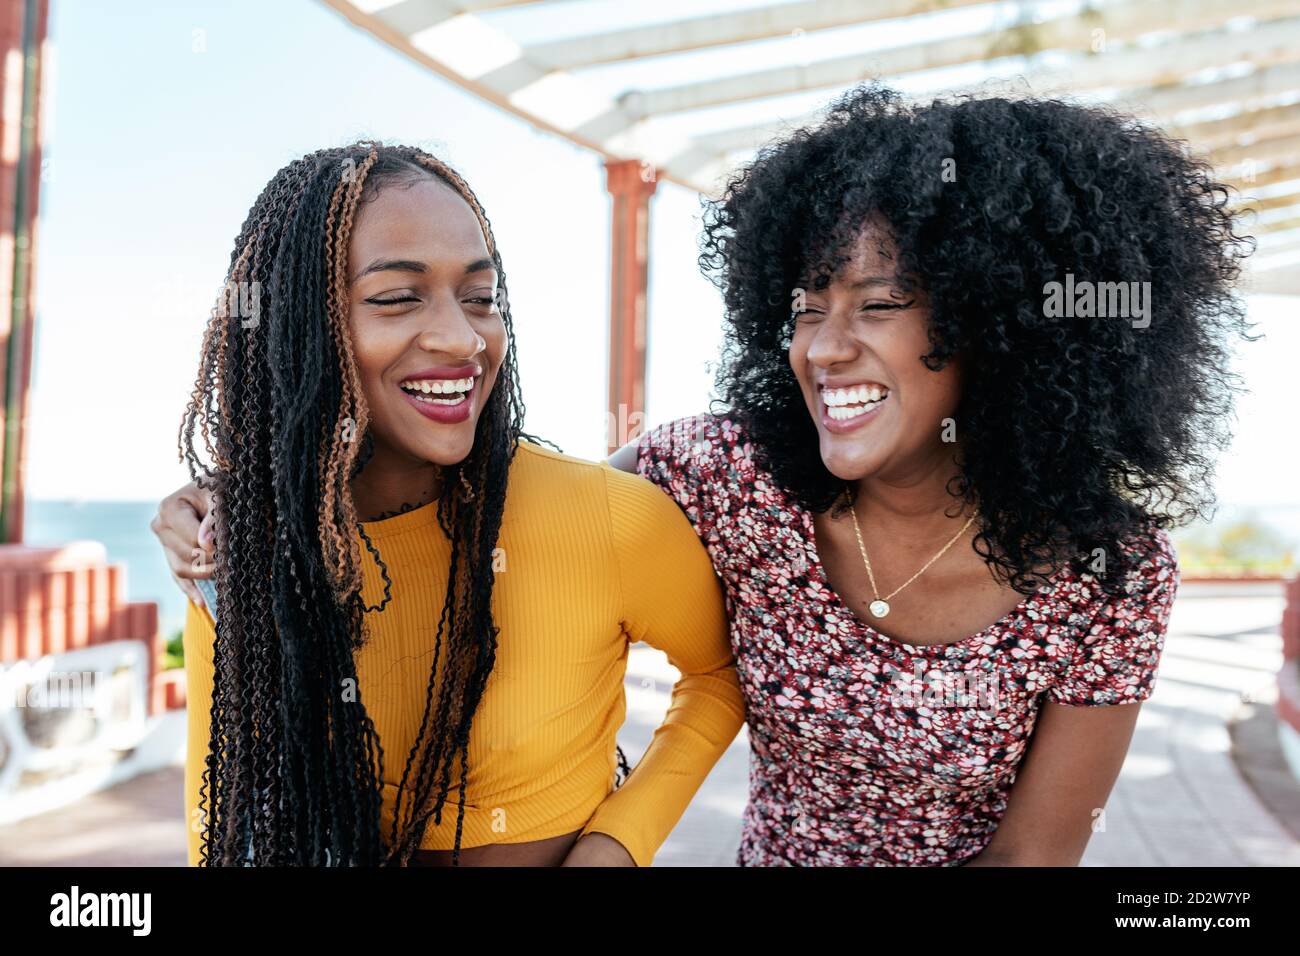 Black woman with curly hair hugging delighted African American female friend with braids while standing on embankment and looking away Stock Photo